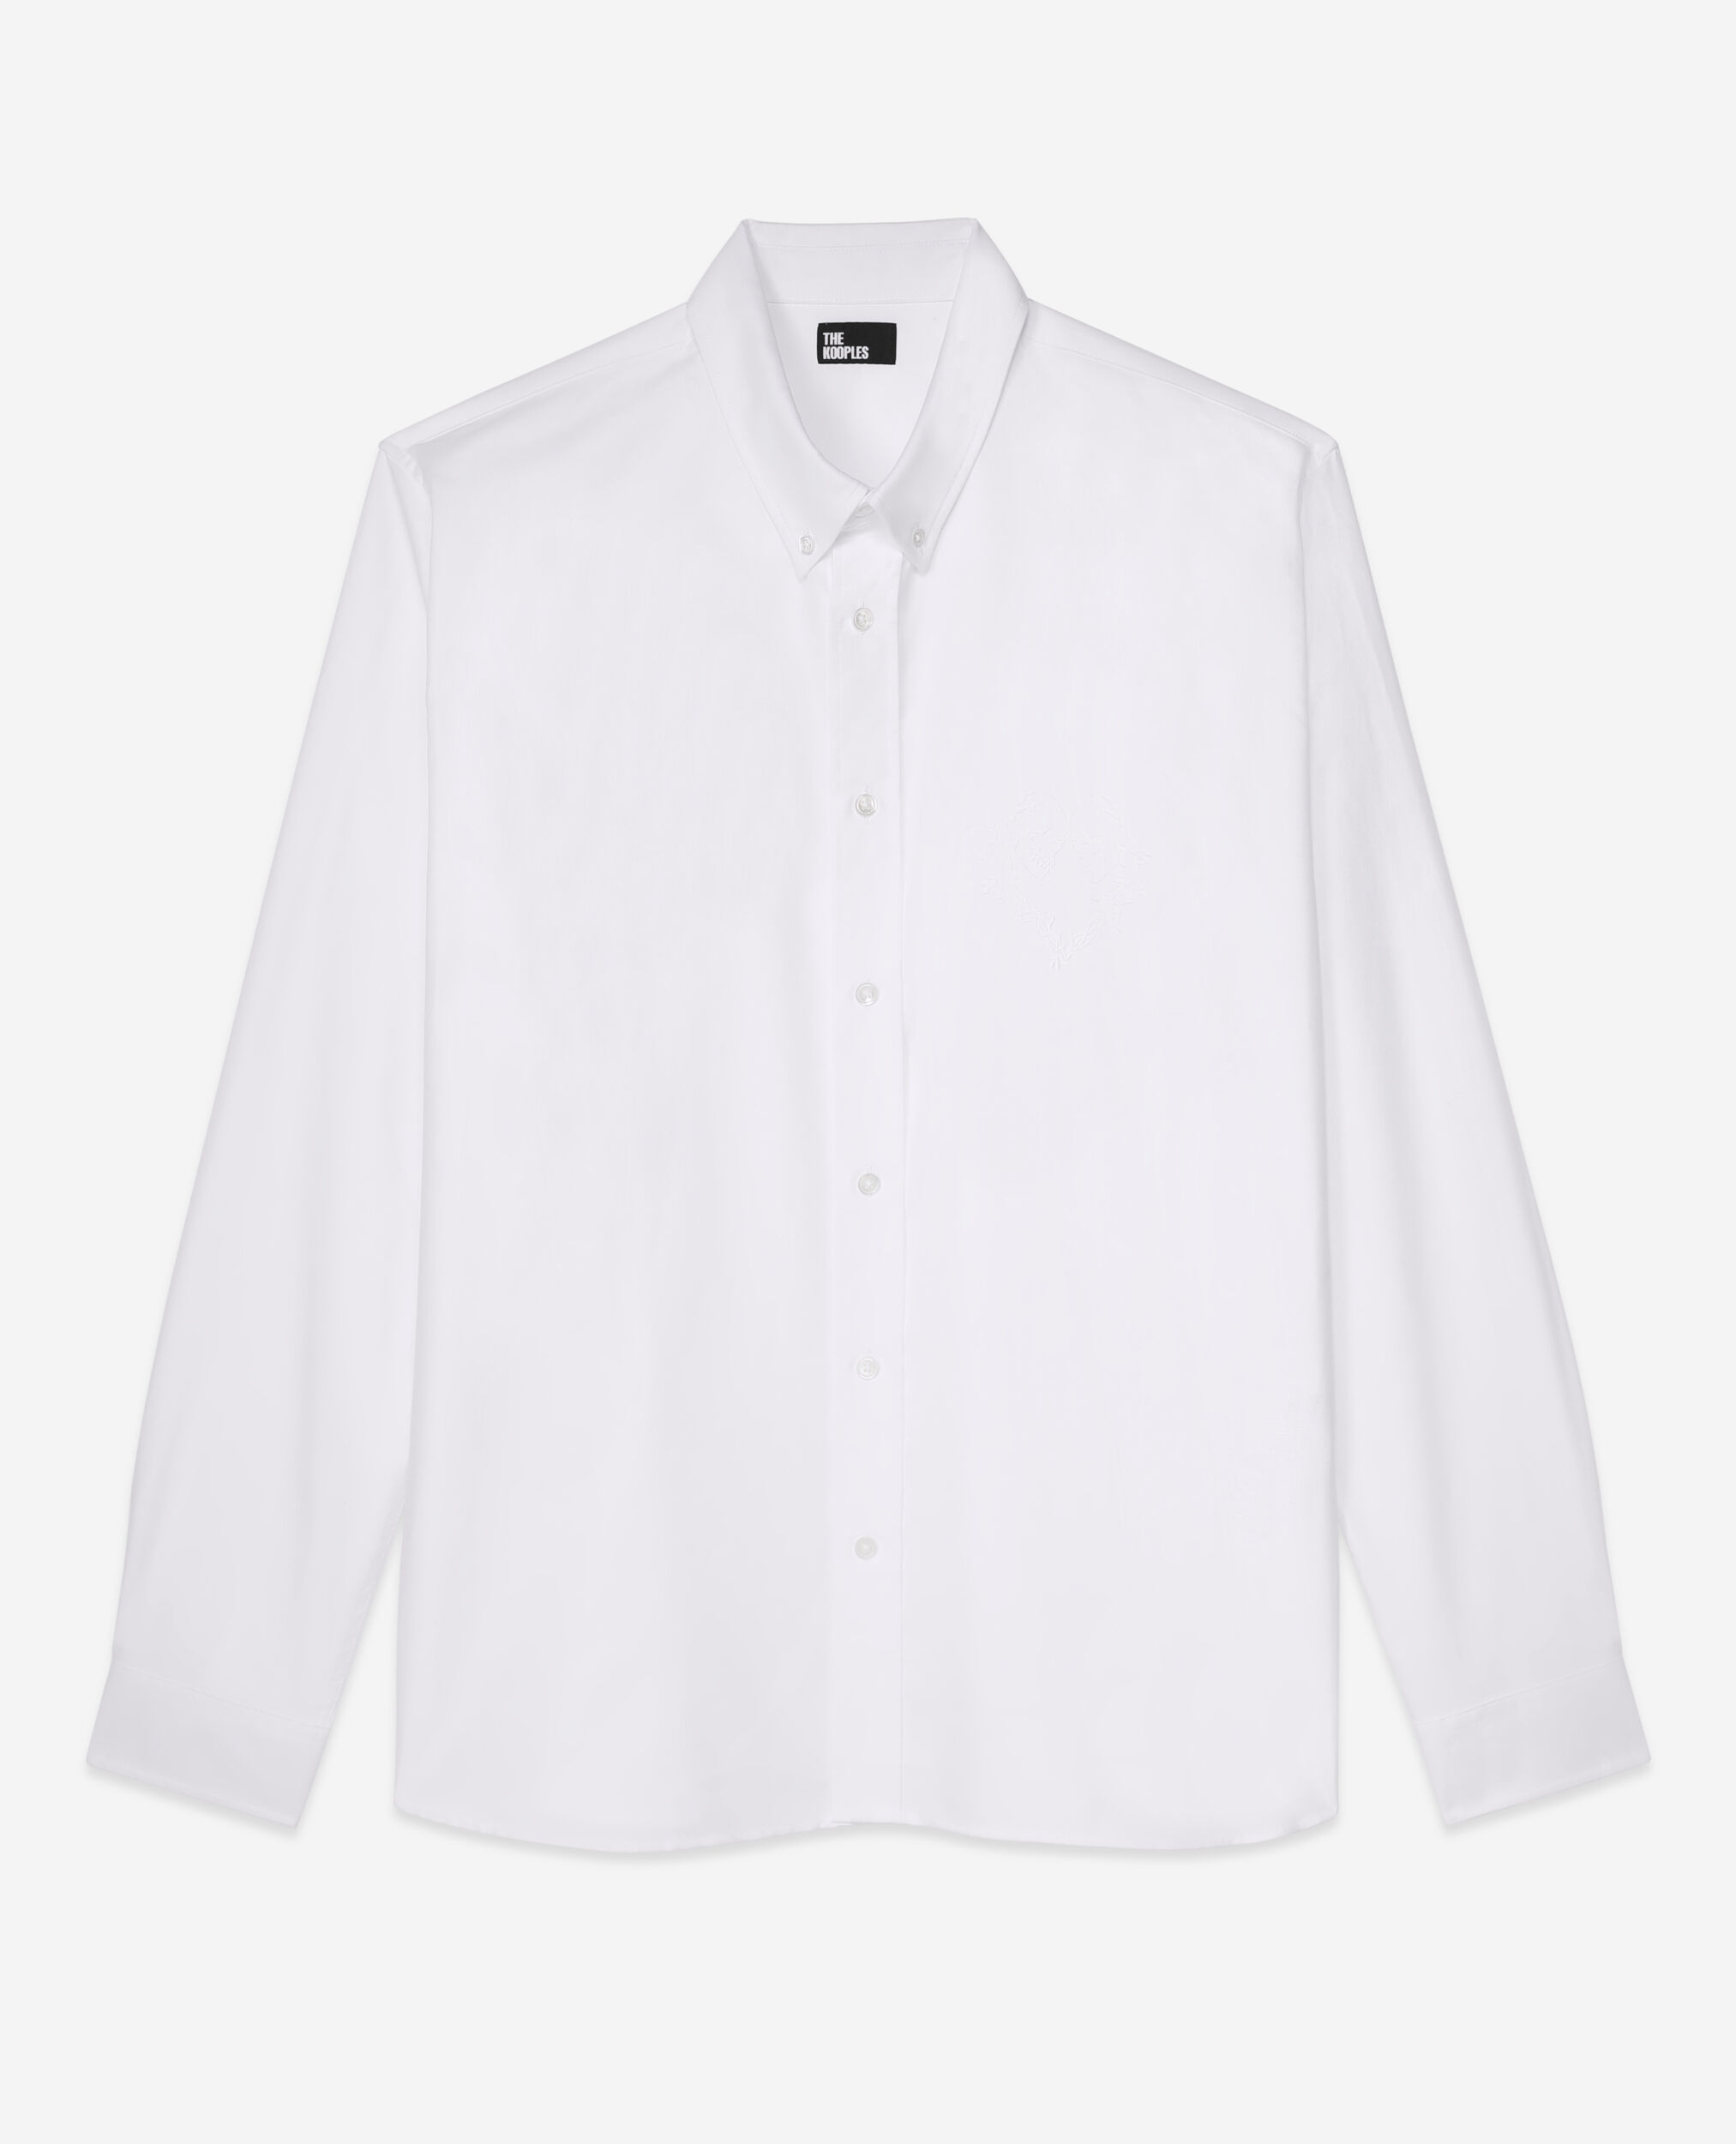 Chemise Oxford blanche avec broderie, WHITE, hi-res image number null